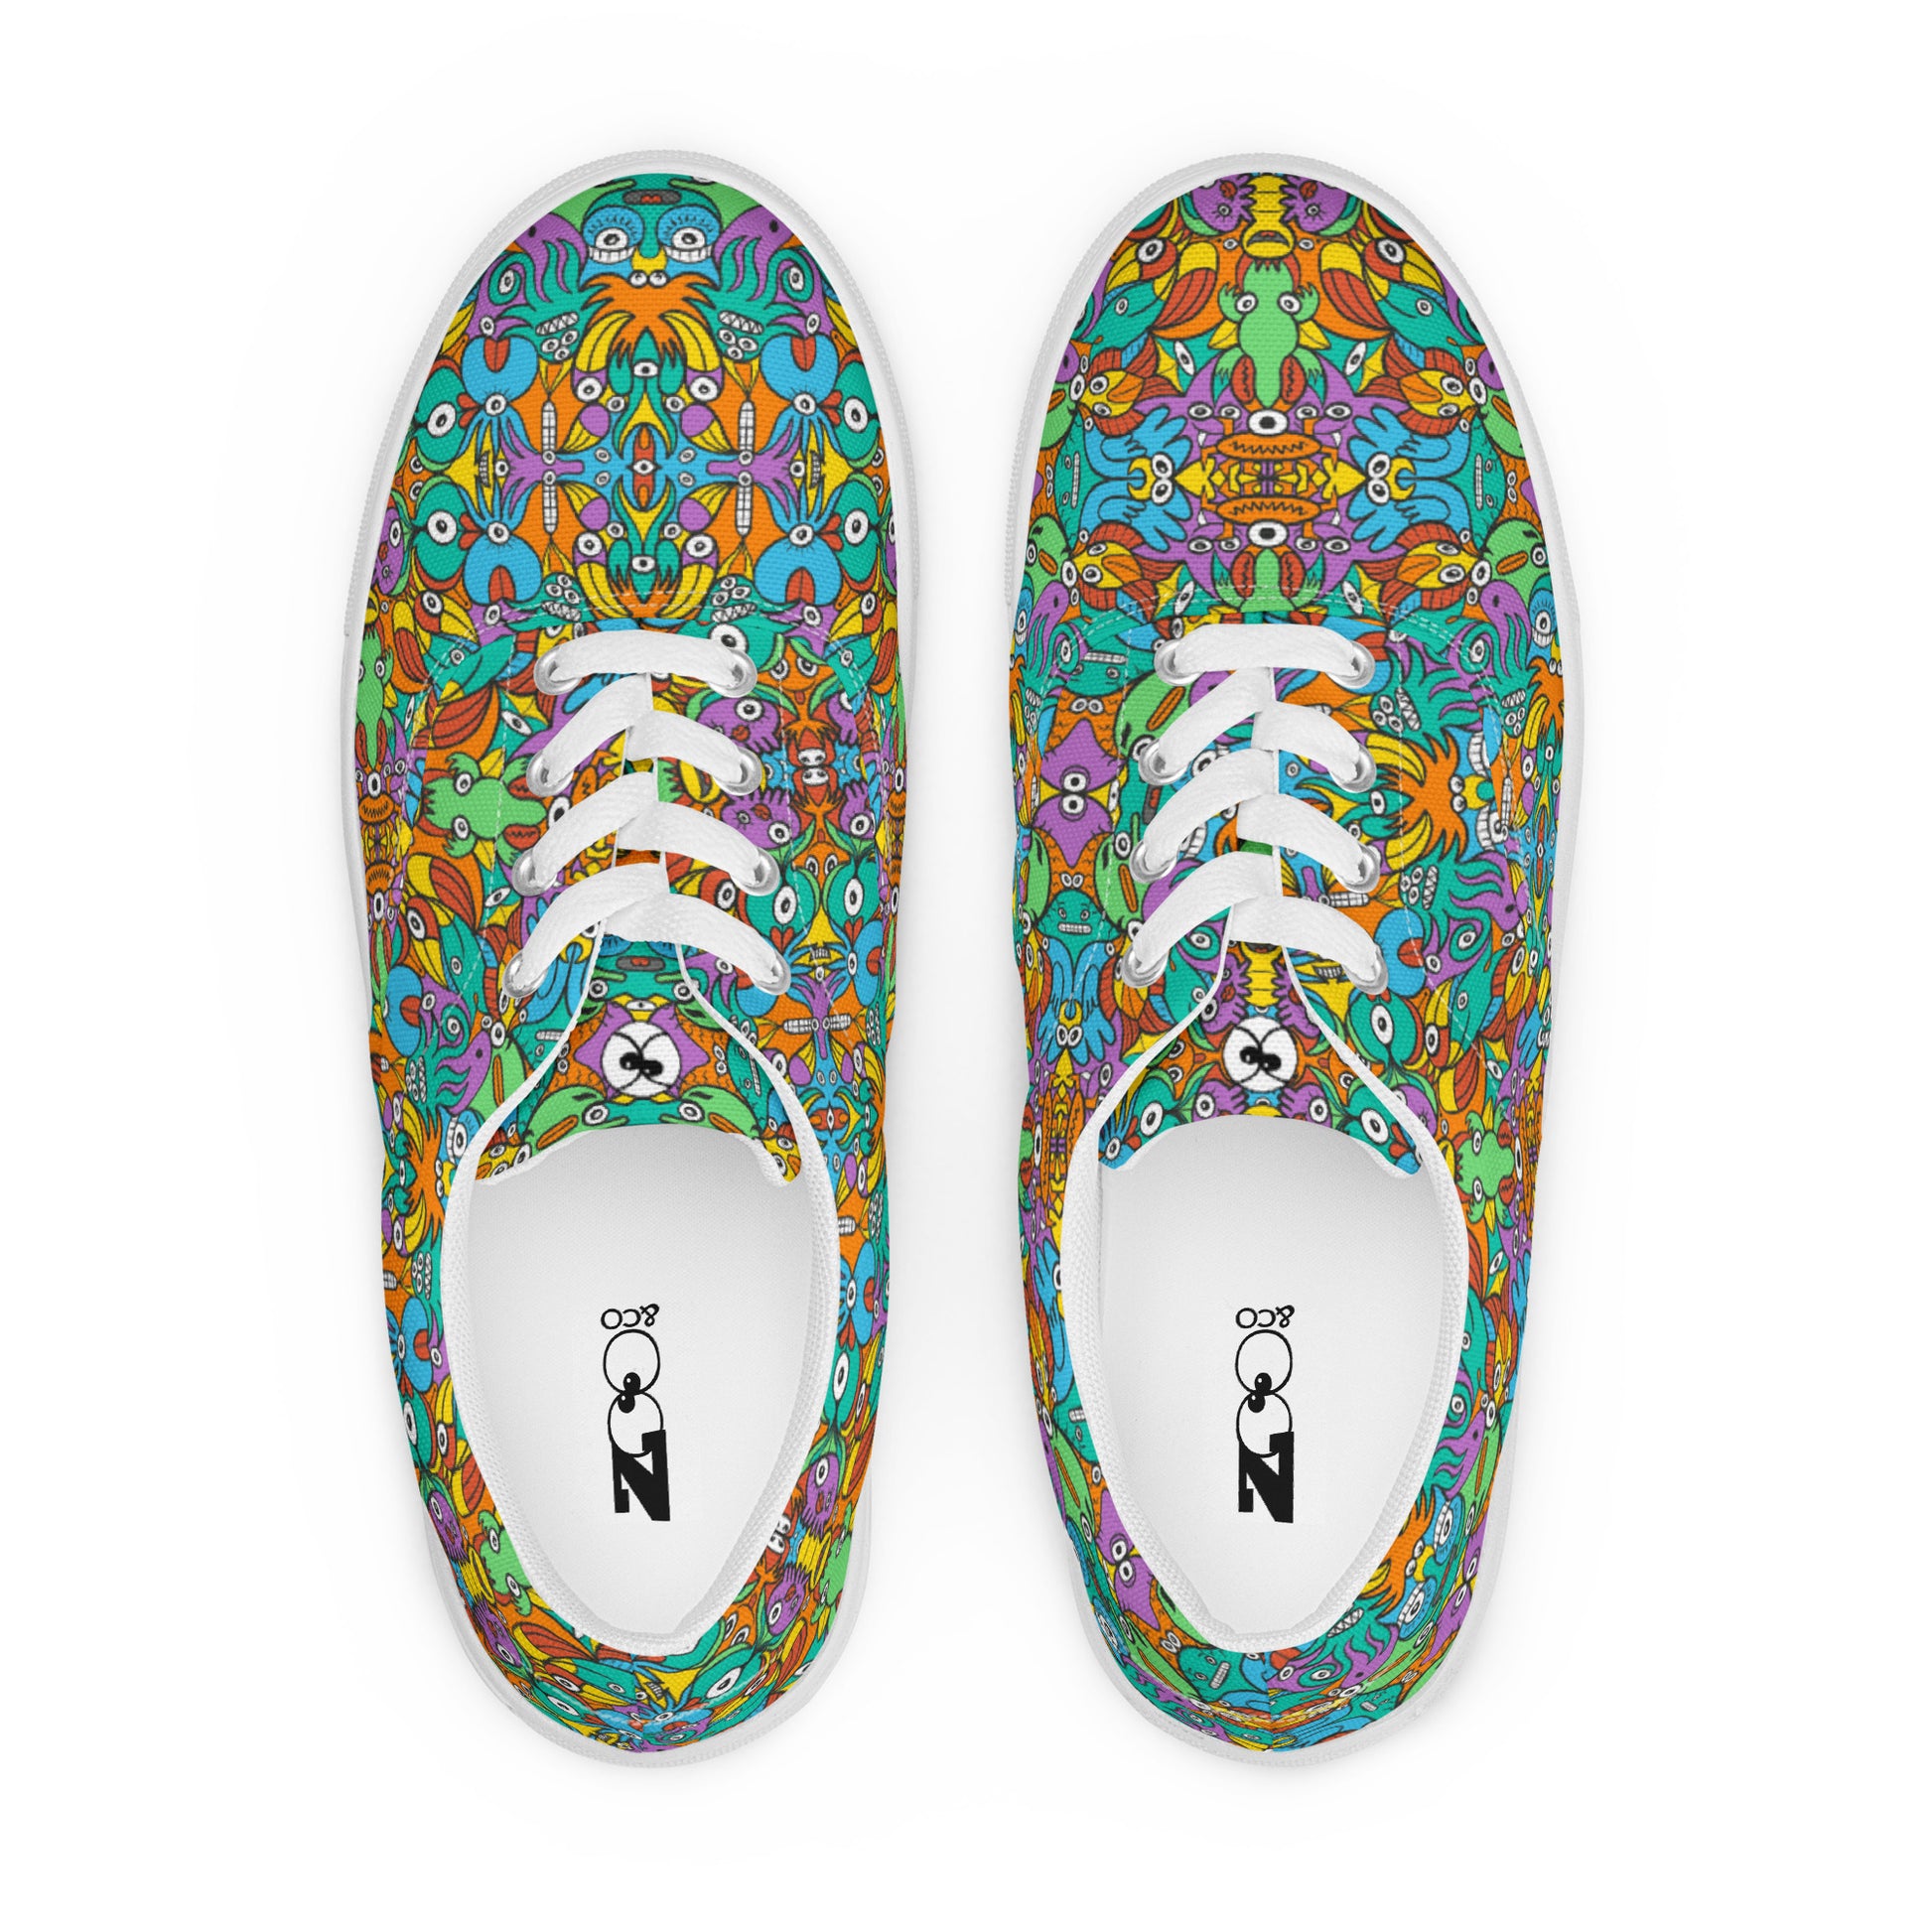 Fantastic doodle world full of weird creatures Men’s lace-up canvas shoes. Top view